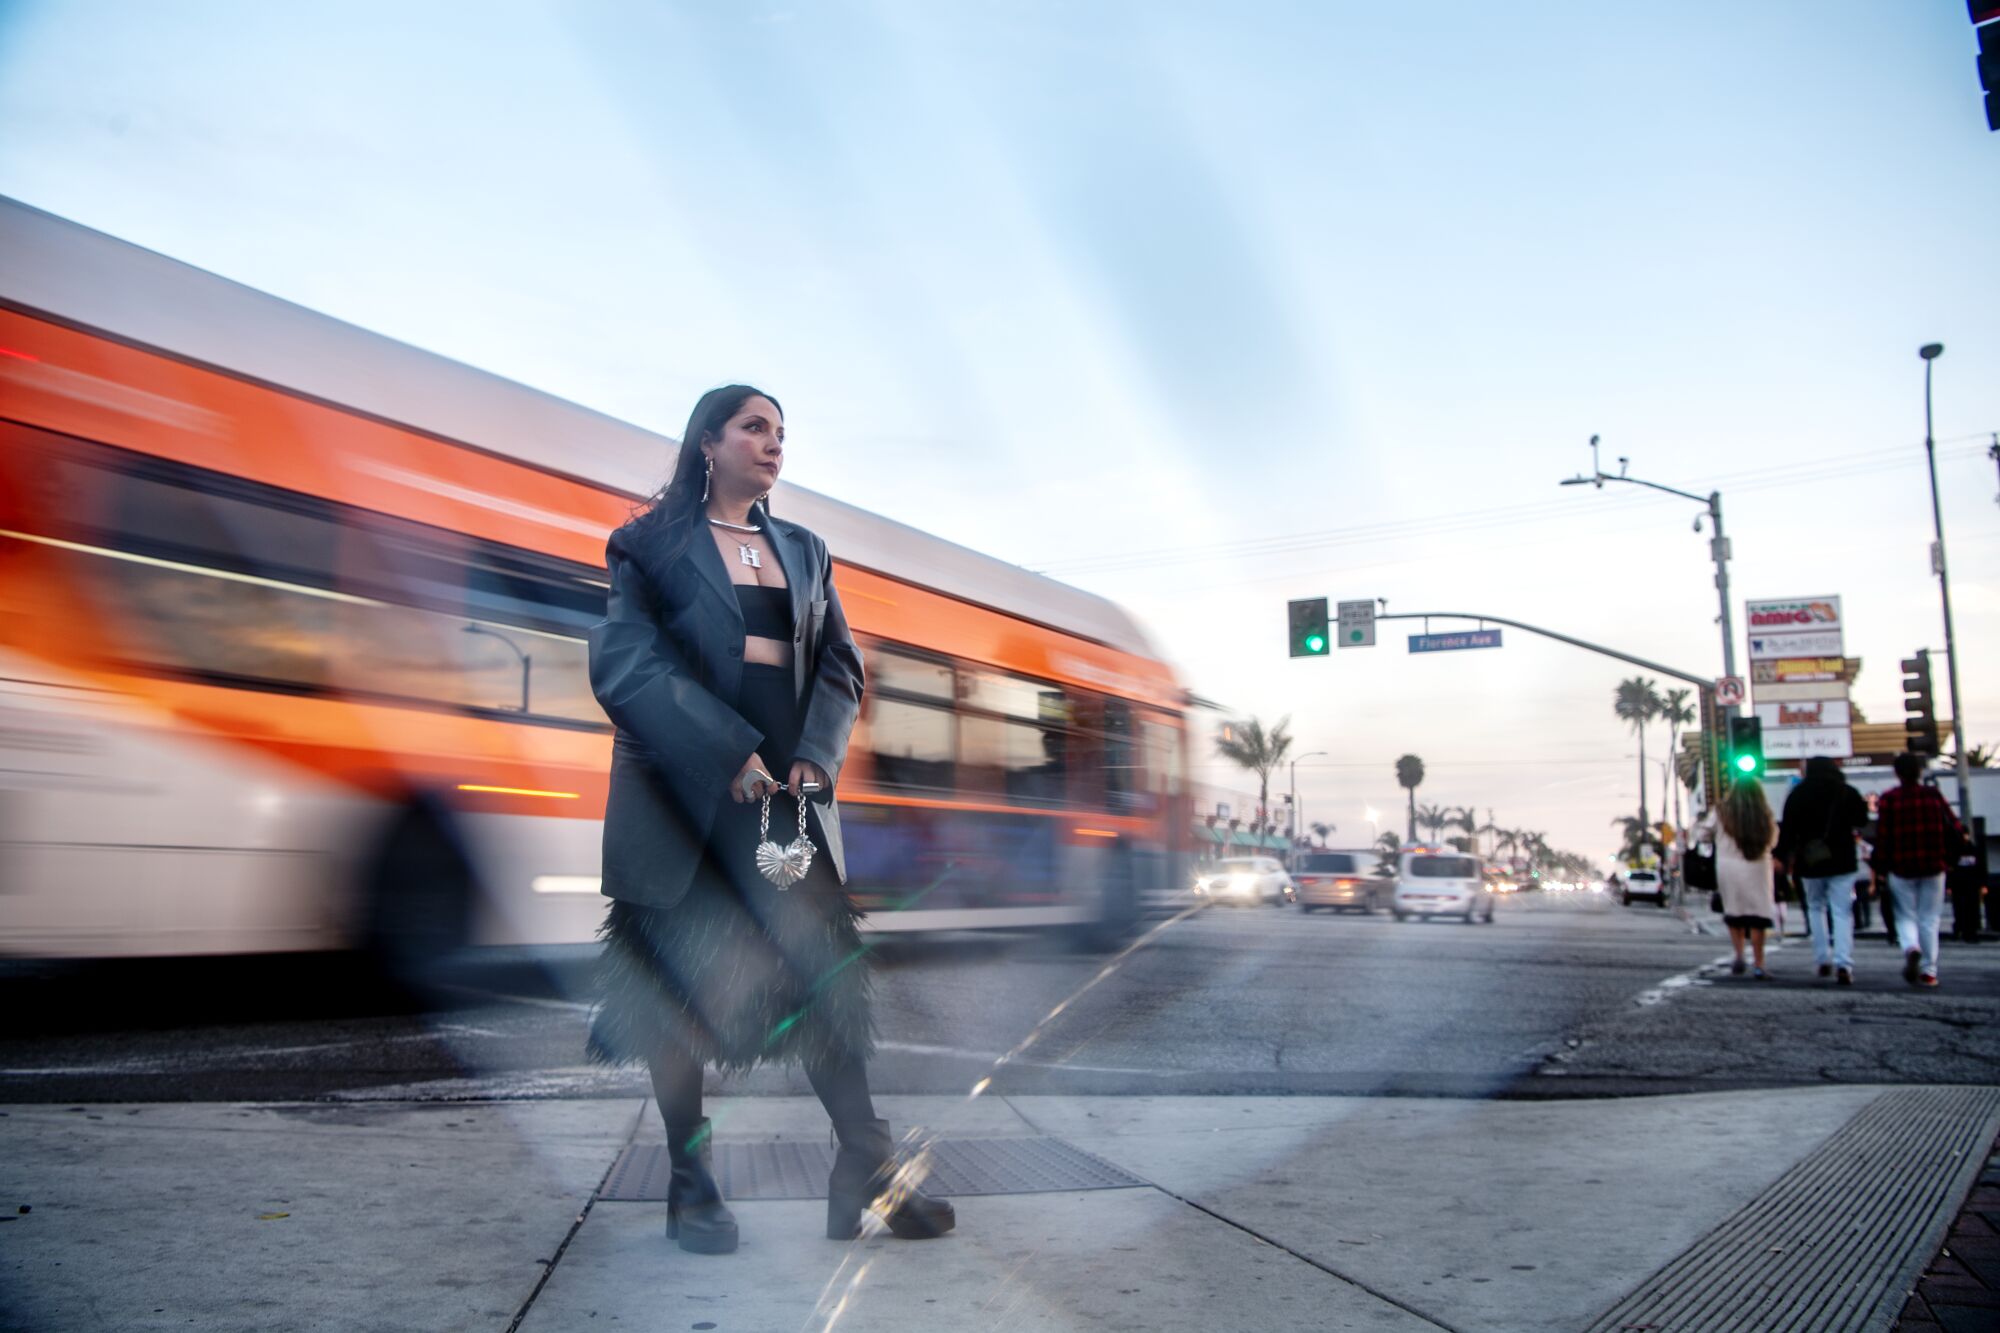 A bus blurs past as a woman stands on a sidewalk.